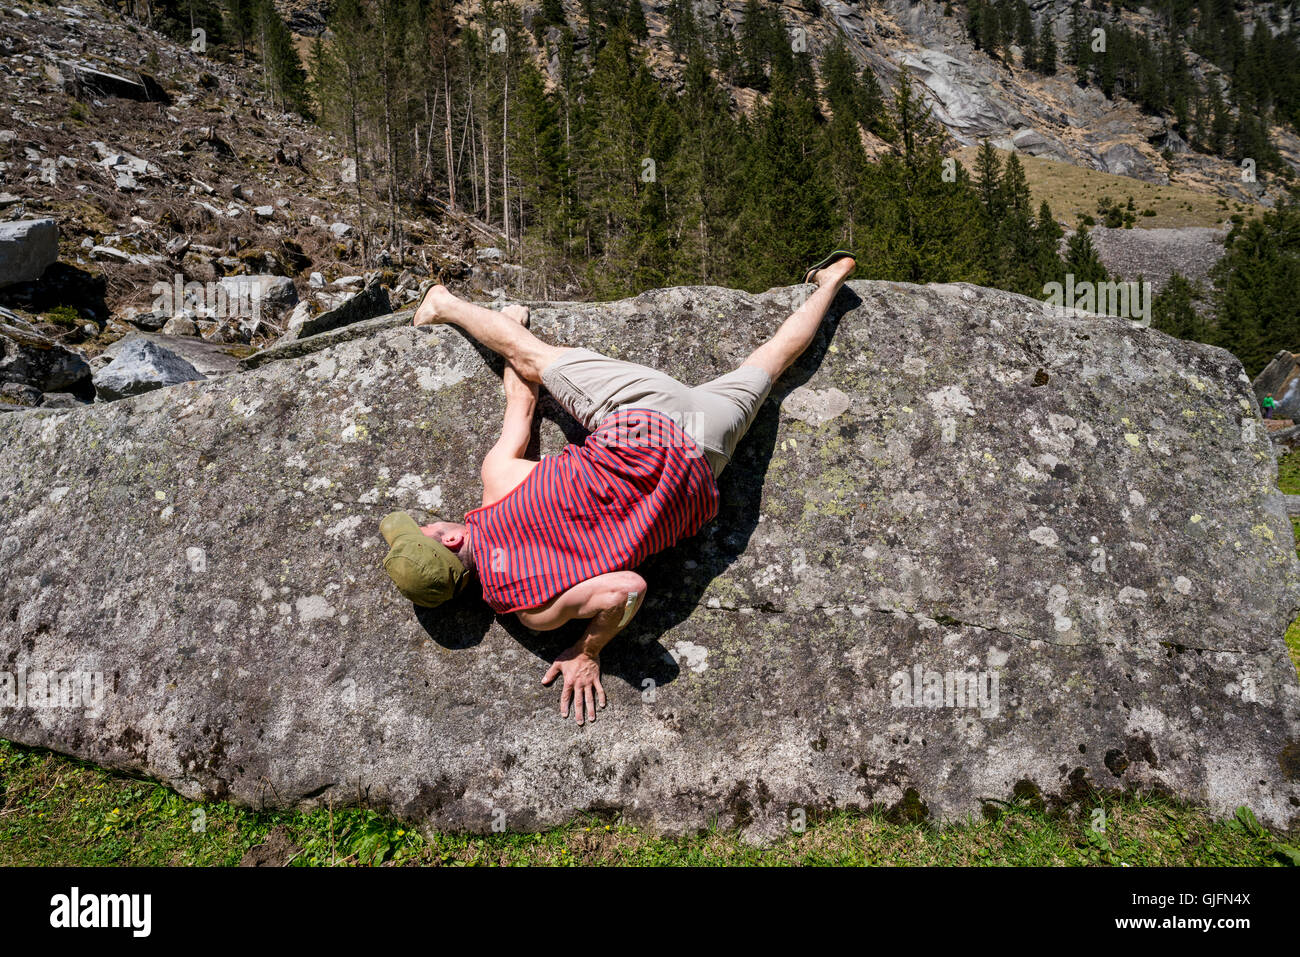 Bouldering, or rock climbing without ropes, in the Sunderground area of Zillertal, Austria in spring. Stock Photo